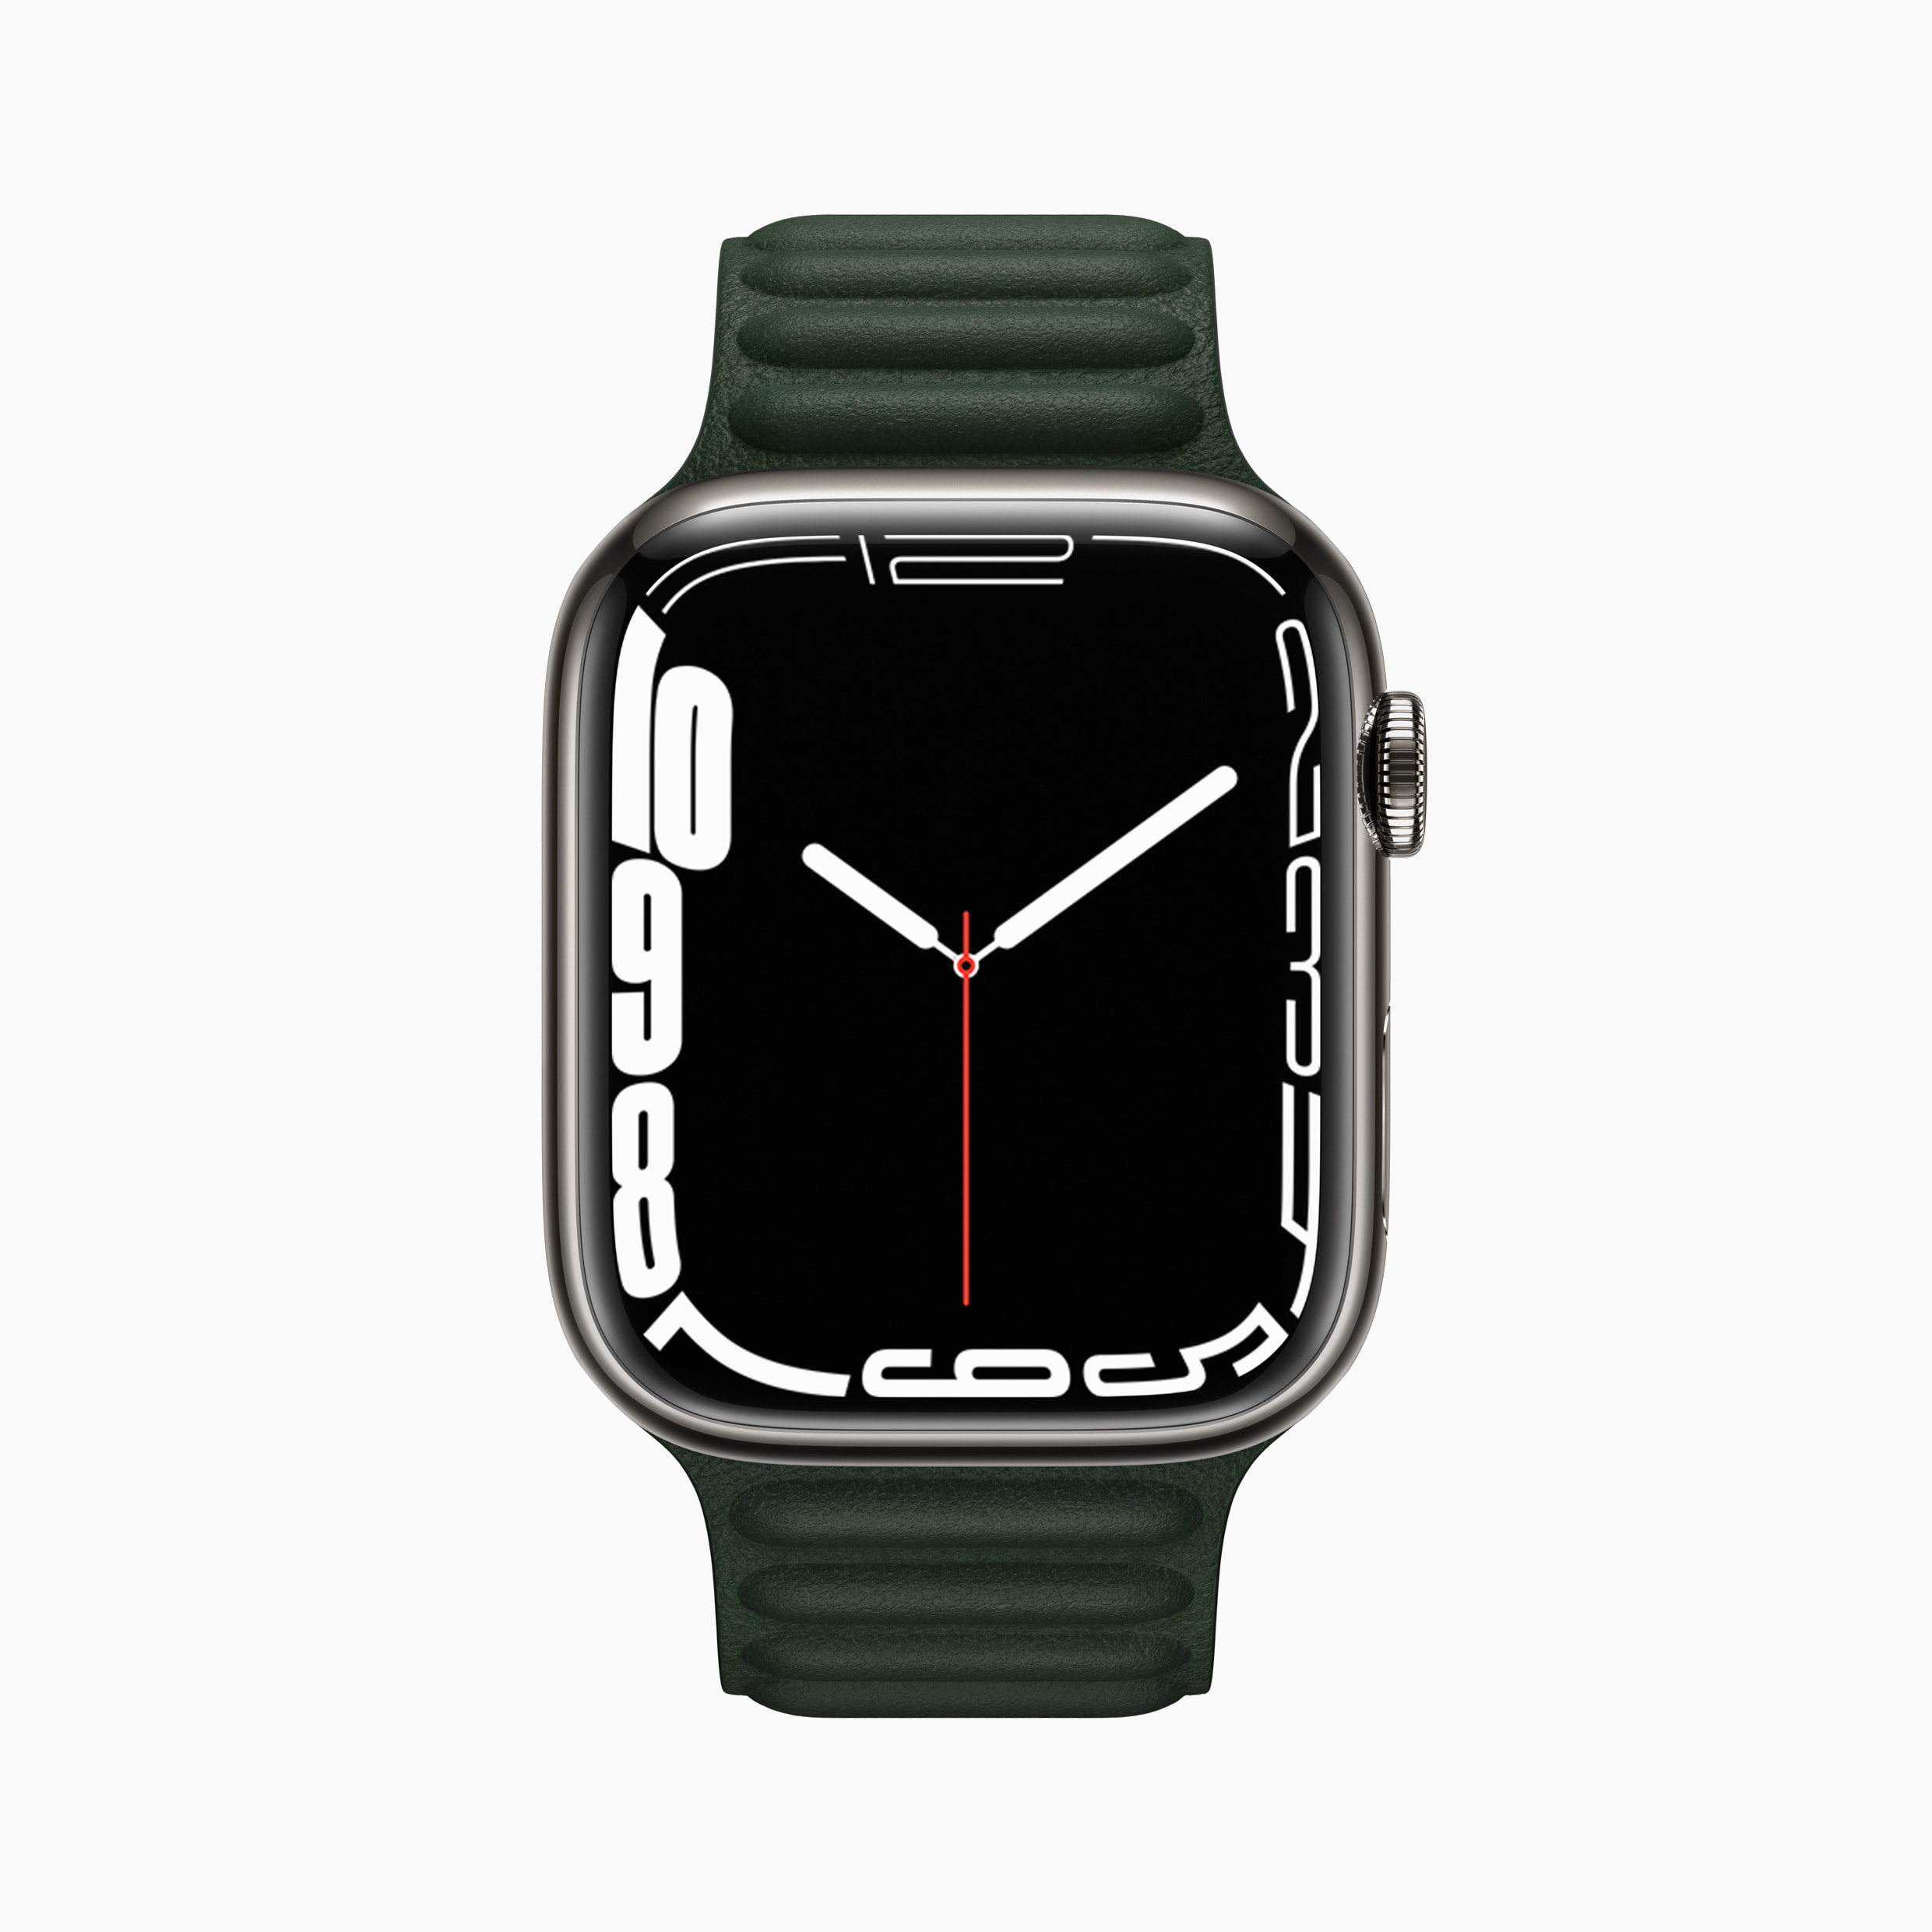 The expansive Apple Watch wallpaper collection